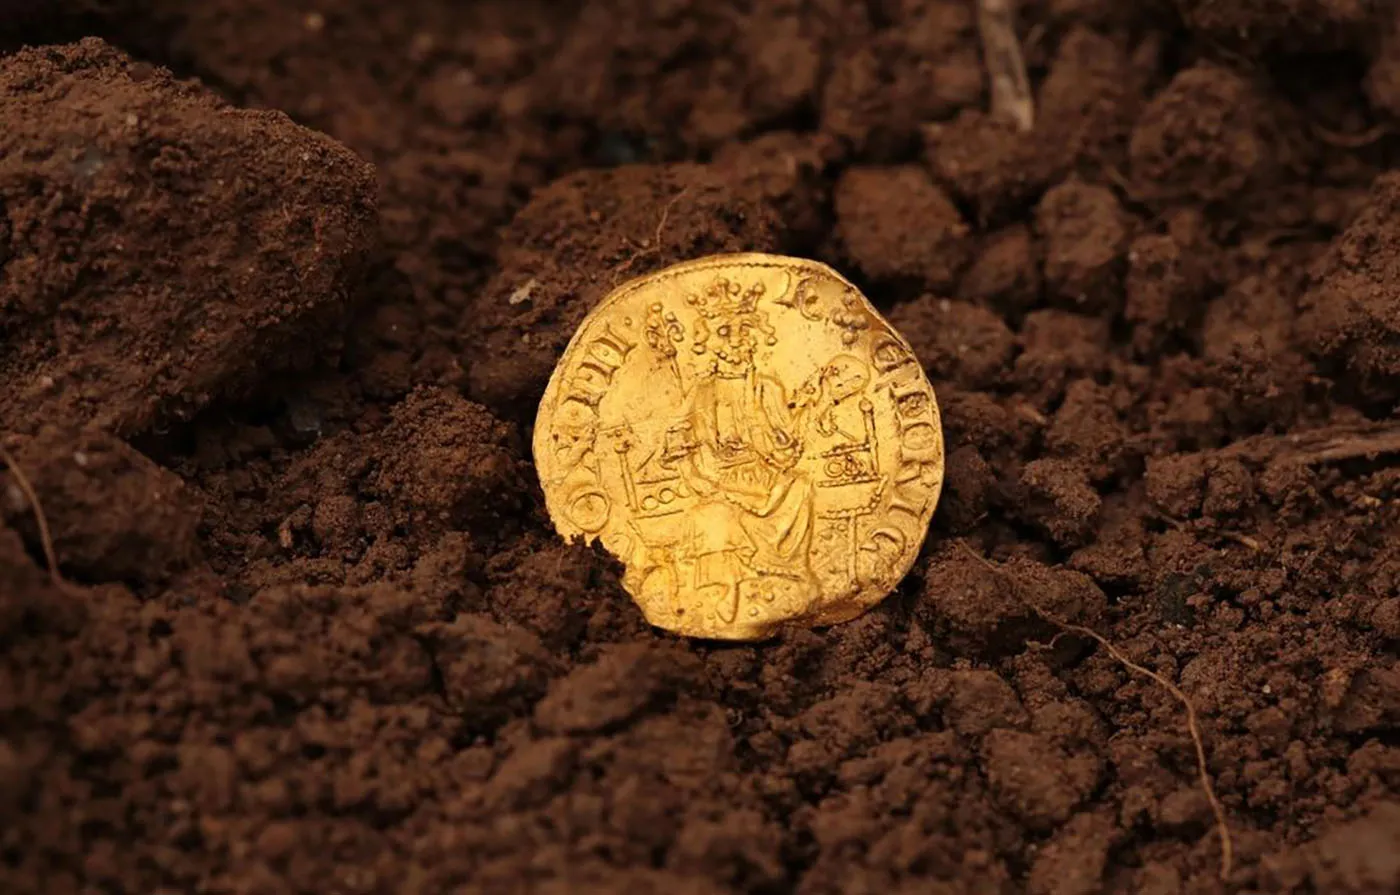 Metal Detectorist Discovers One of England's Earliest Gold Coins In a Farm Field